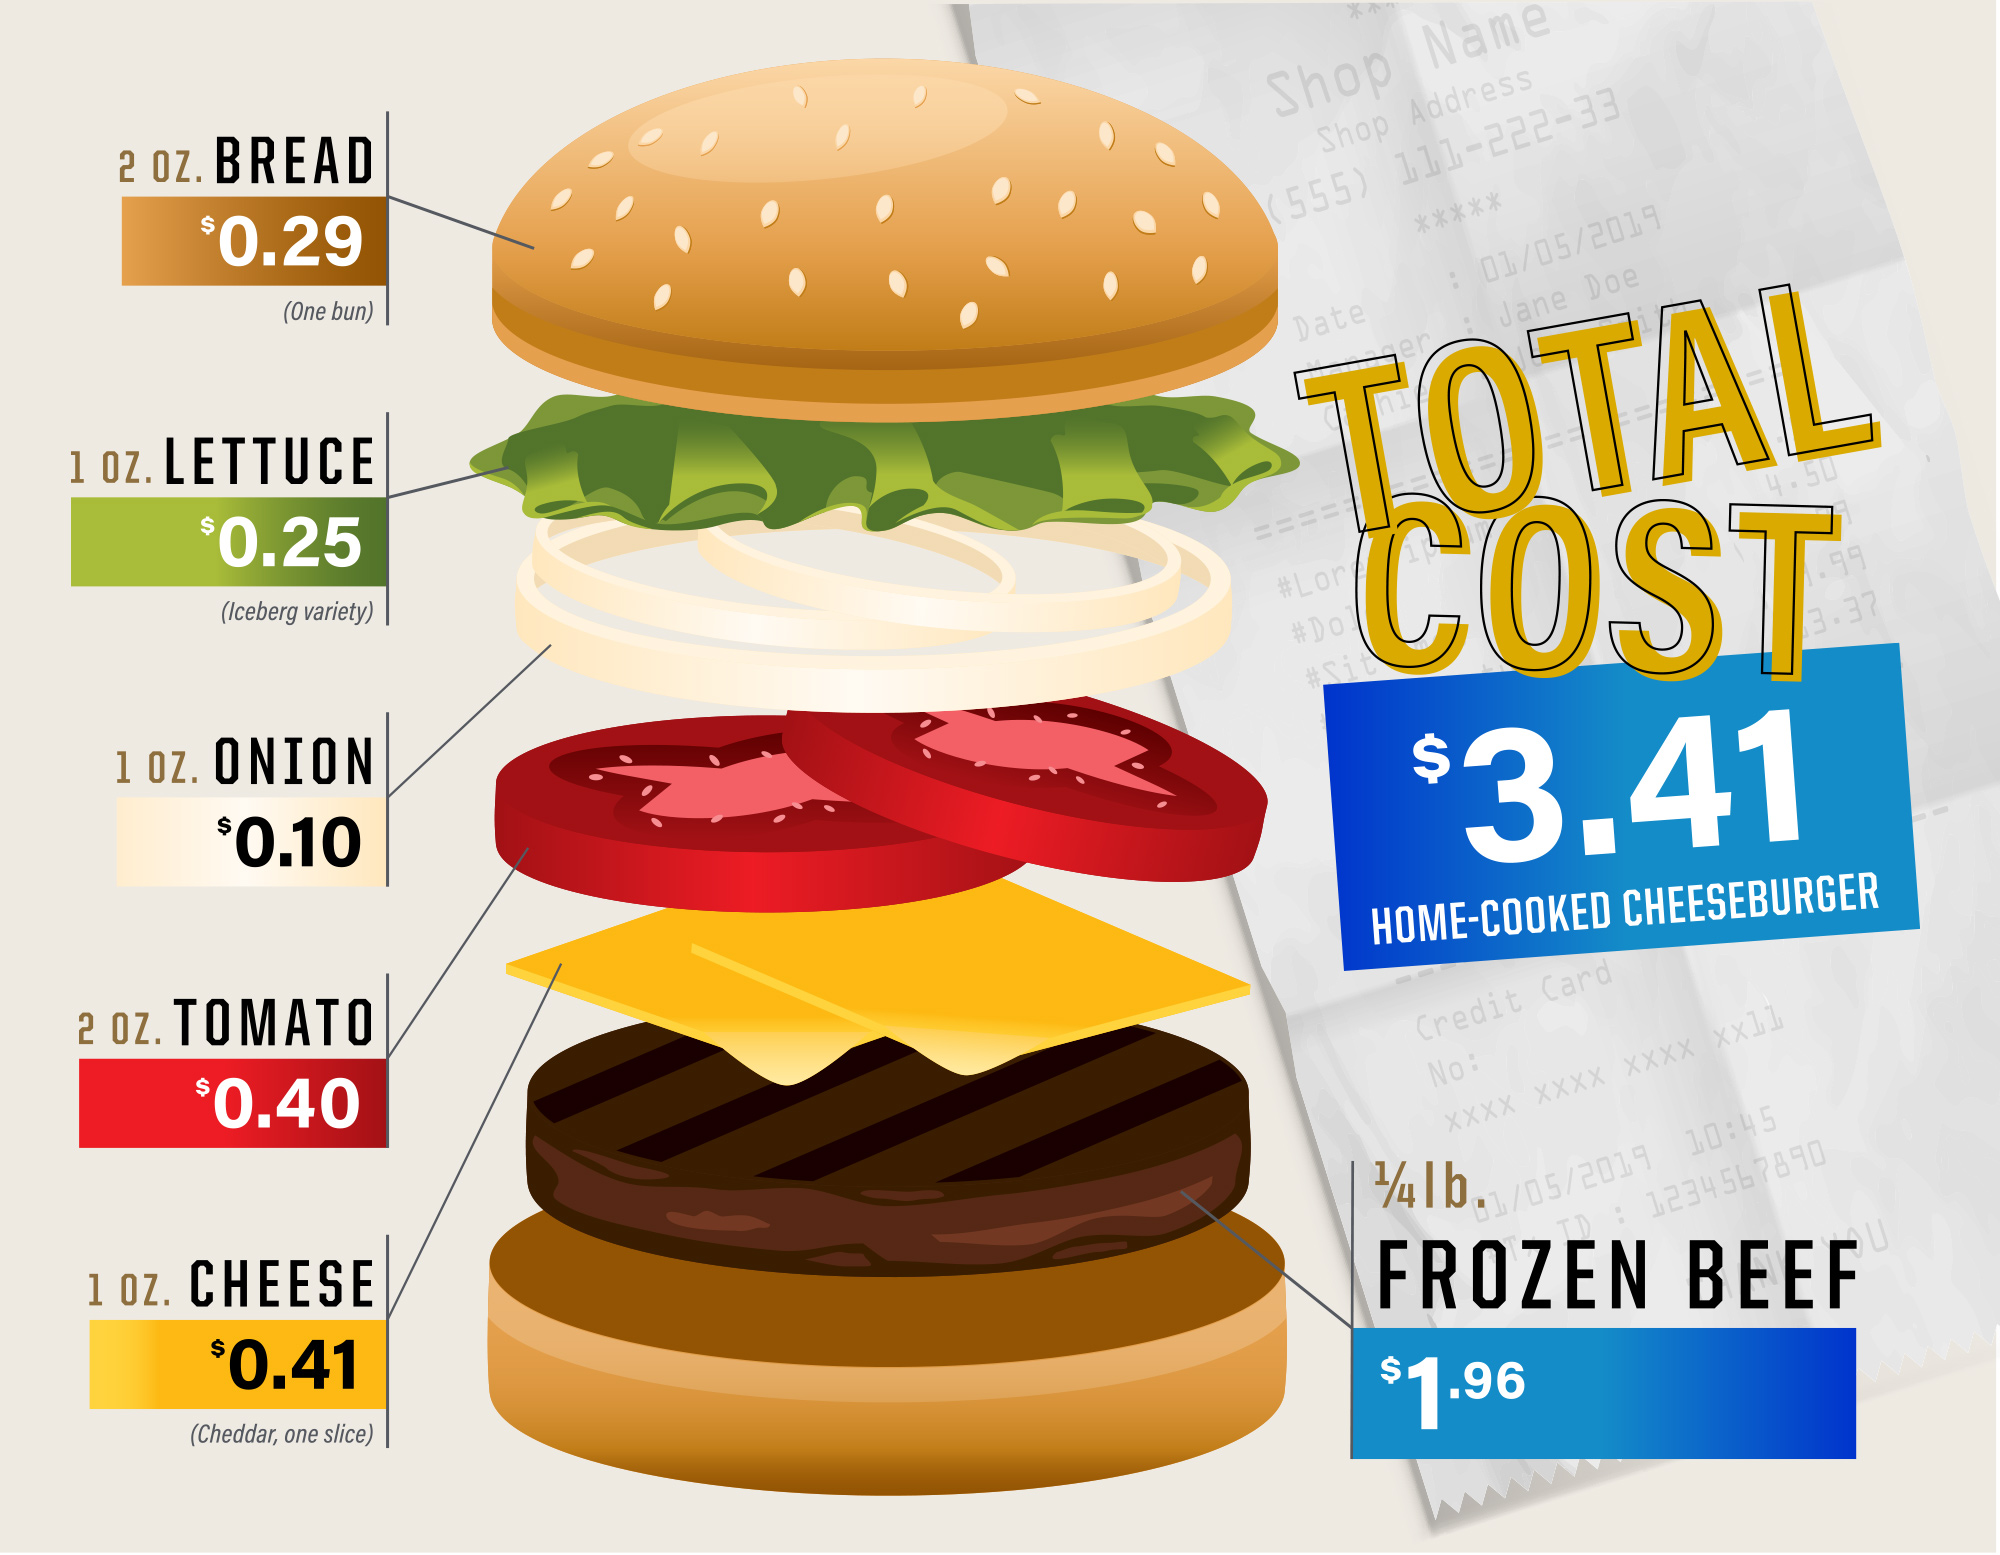 The total cost of a home-cooked burger using ¼ lb. frozen ground beef, one 2 oz. bun, 1 oz. lettuce, 1 oz. onion, 2 oz. tomato and one 1 oz. slice of cheese is $3.41.